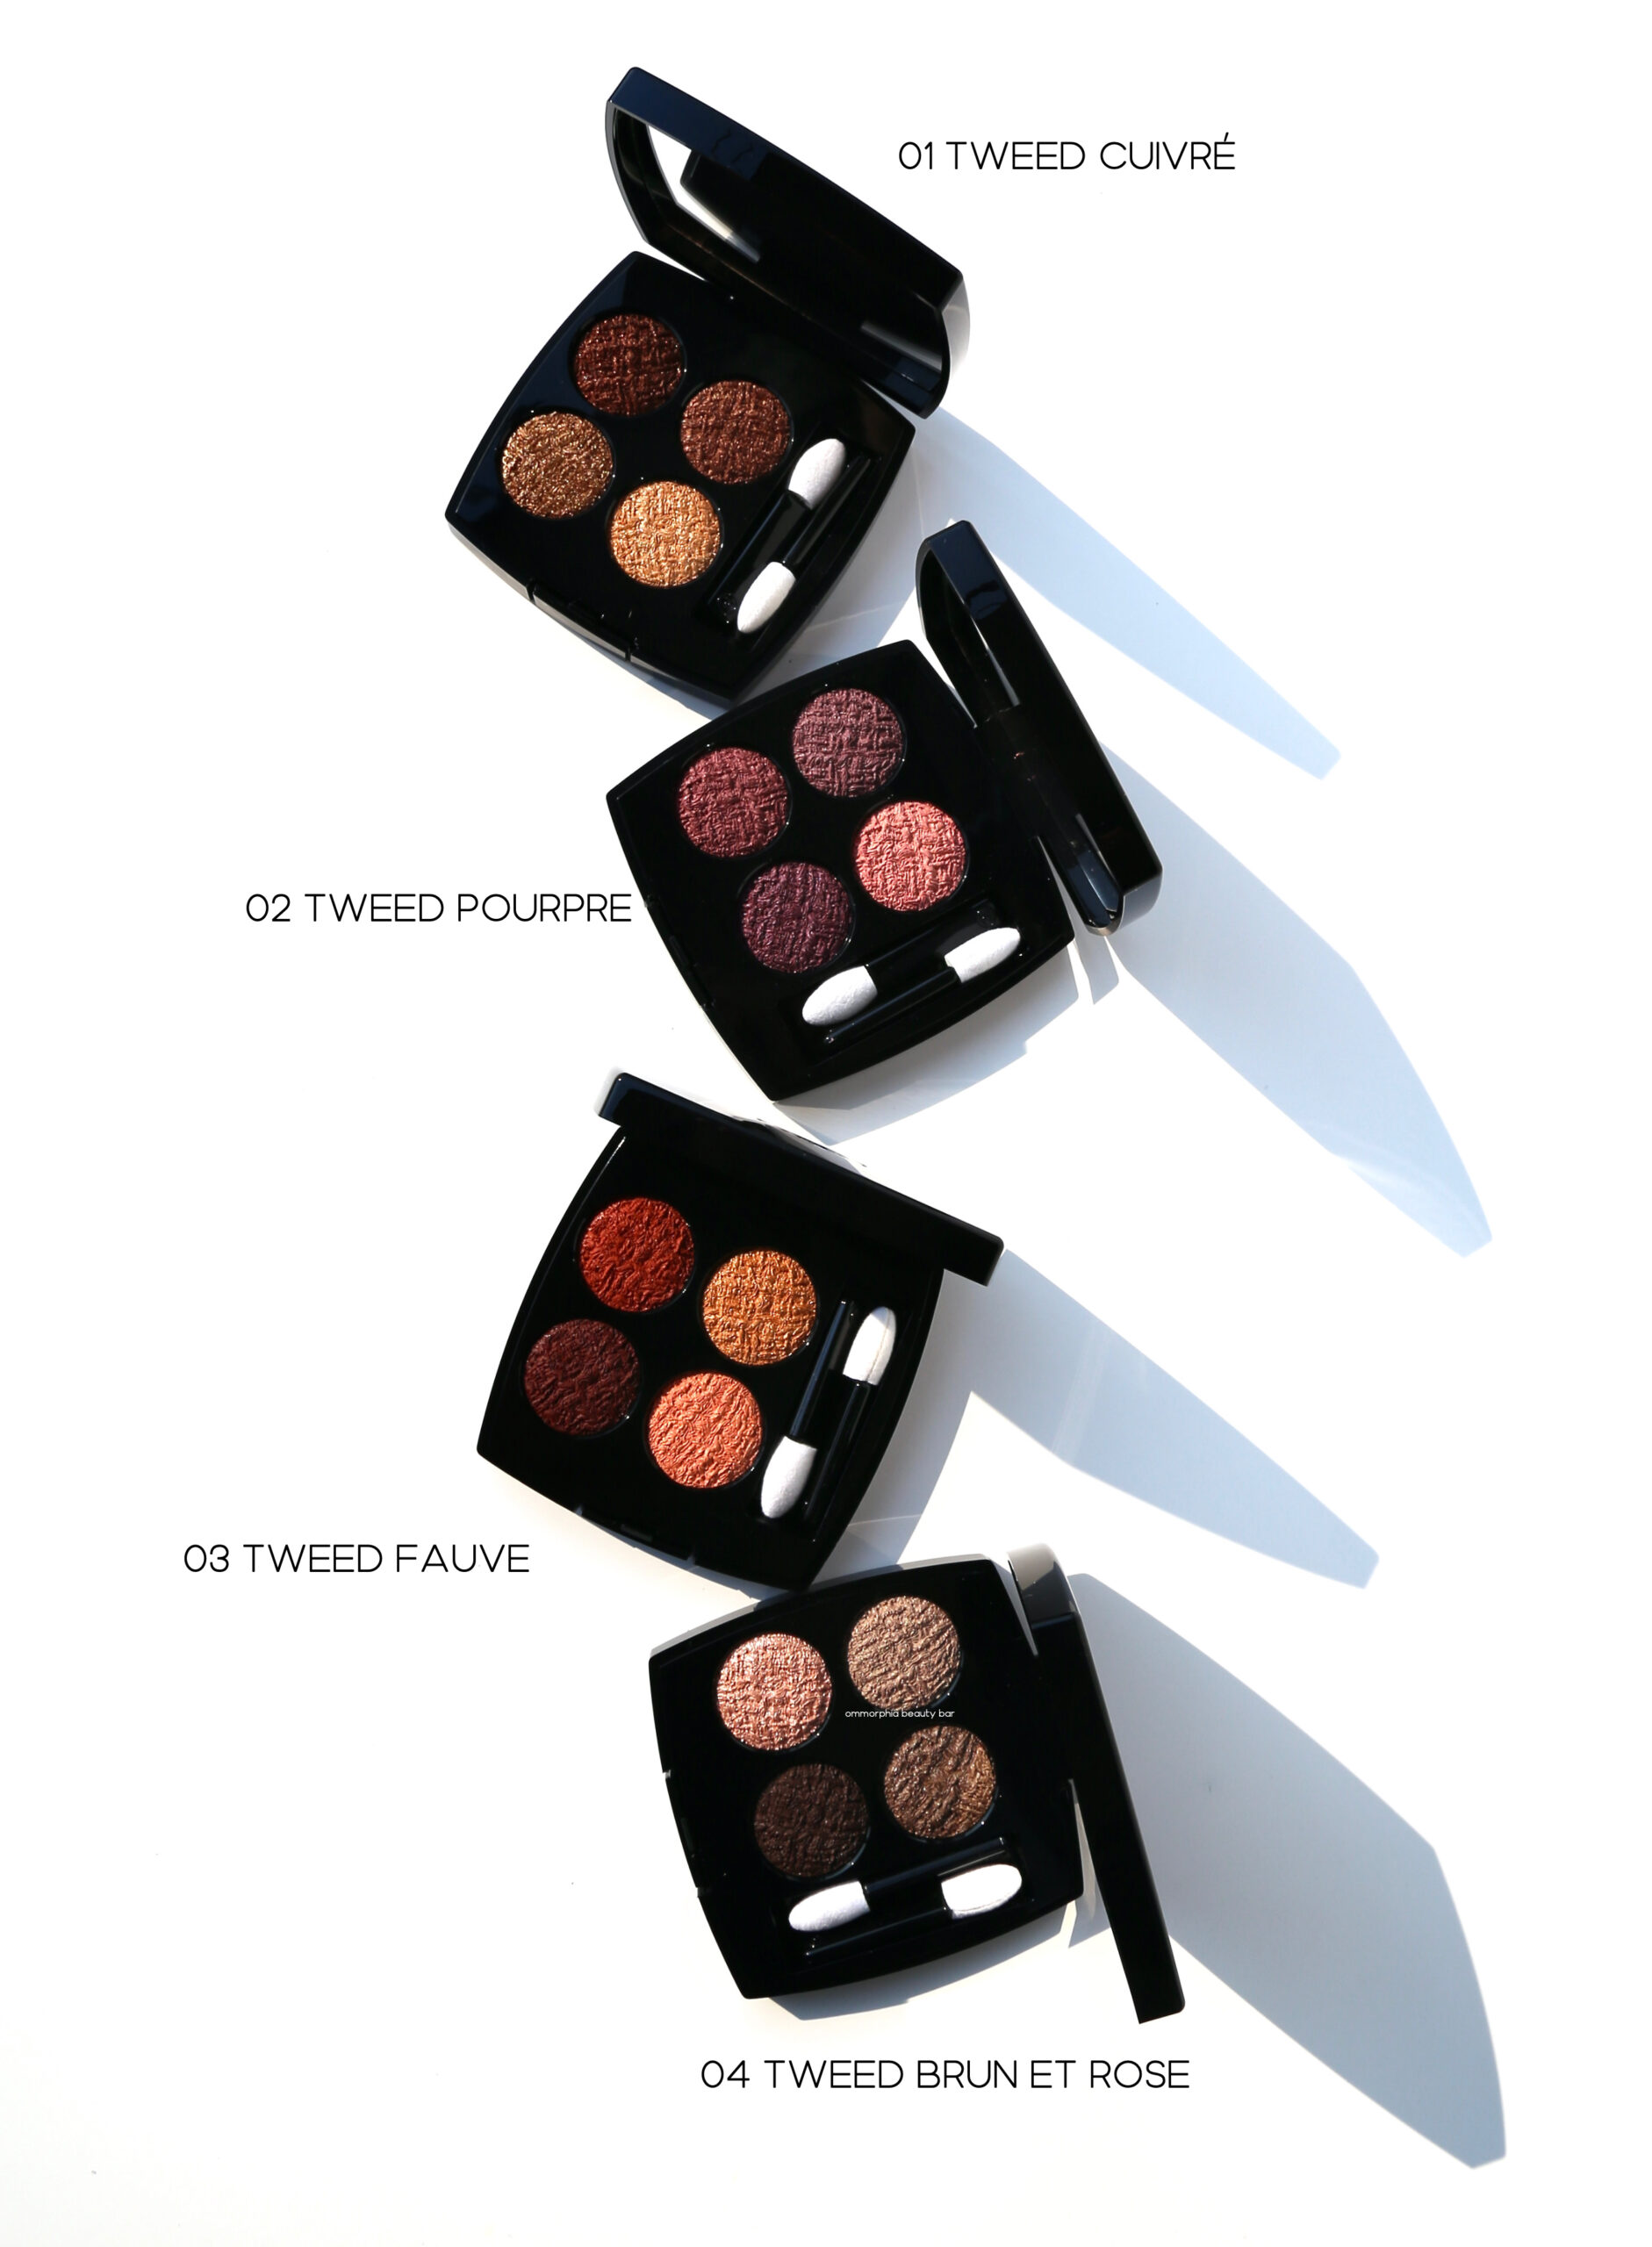 CHANEL · Les 4 Ombres Tweed Collection 2022